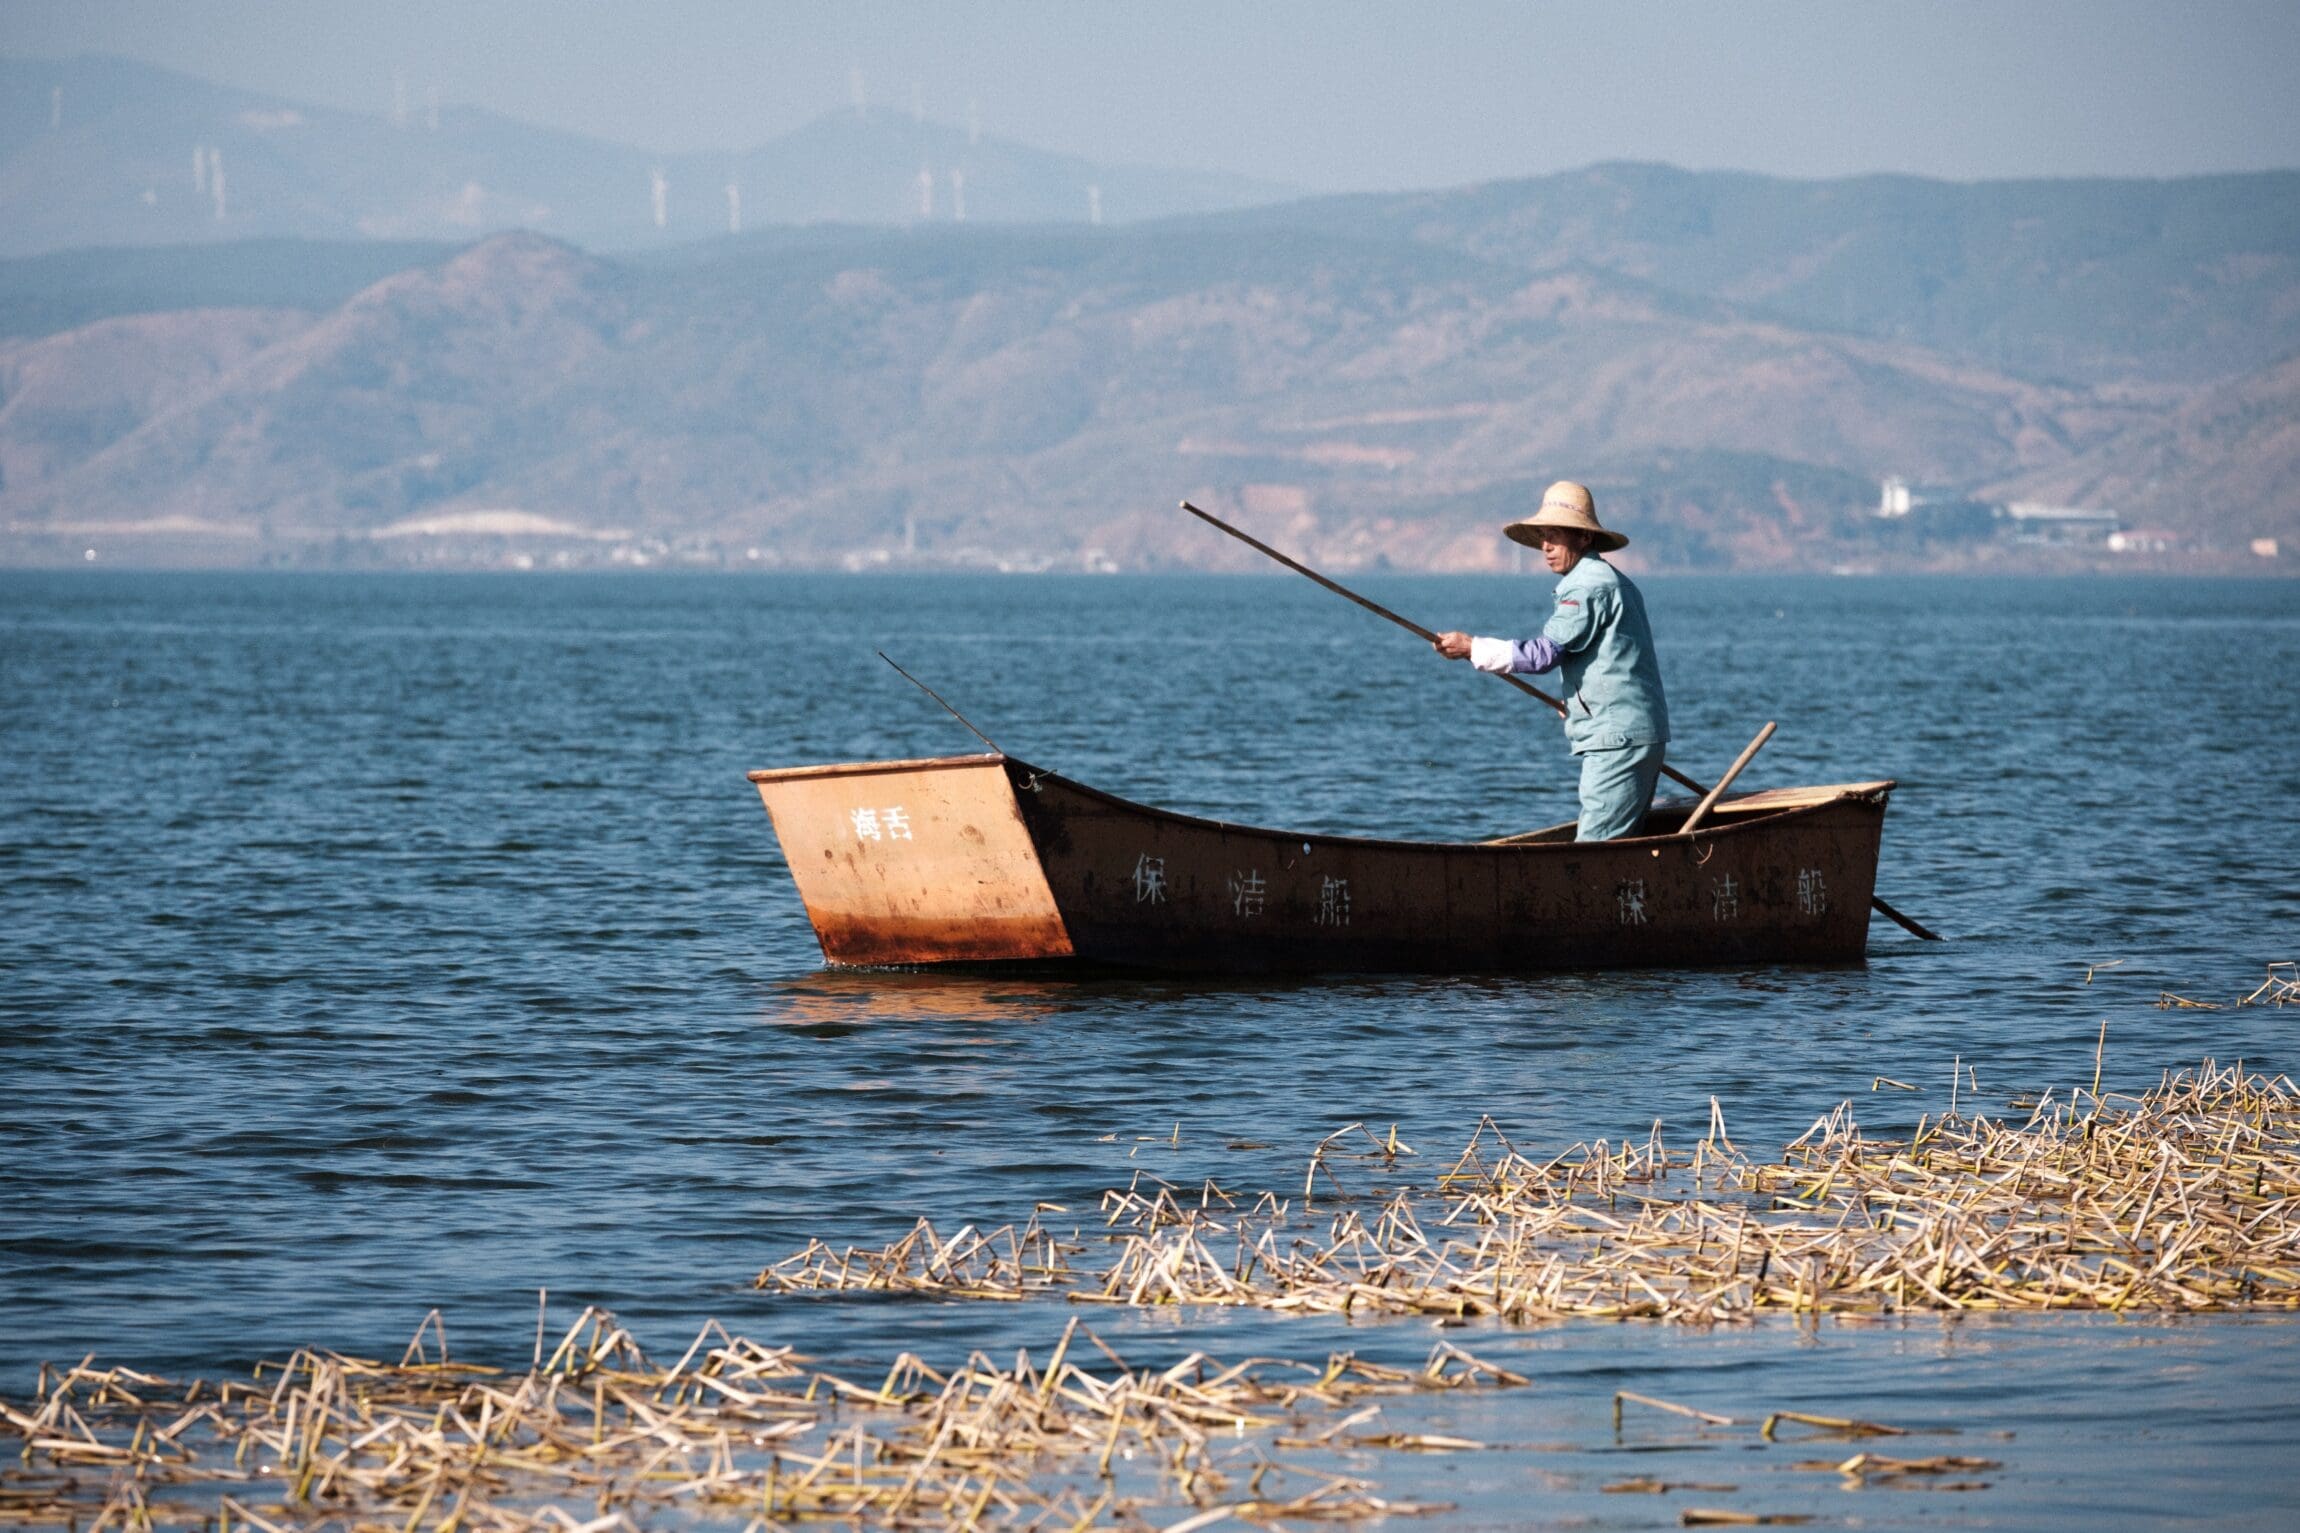 The rise of rural China | a man on a wooden boat on Erhai Lake in Dali City, photography by Lincoln Yoon